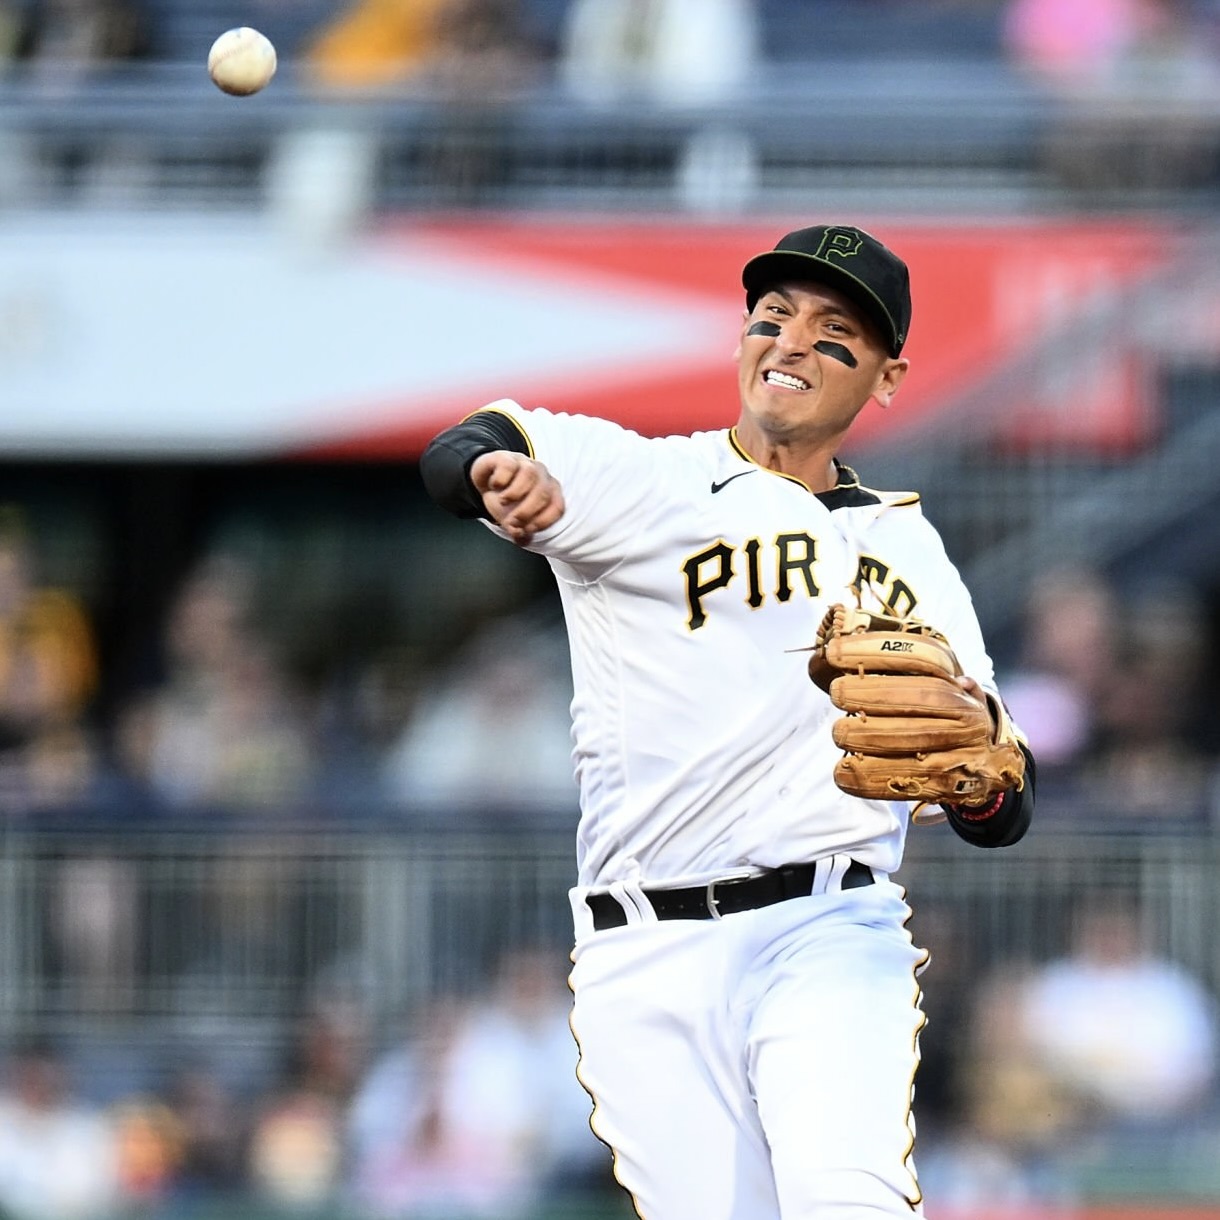 Dejan Kovacevic: Oneil Cruz's injury's a bummer, but no burial's needed for  these Pirates